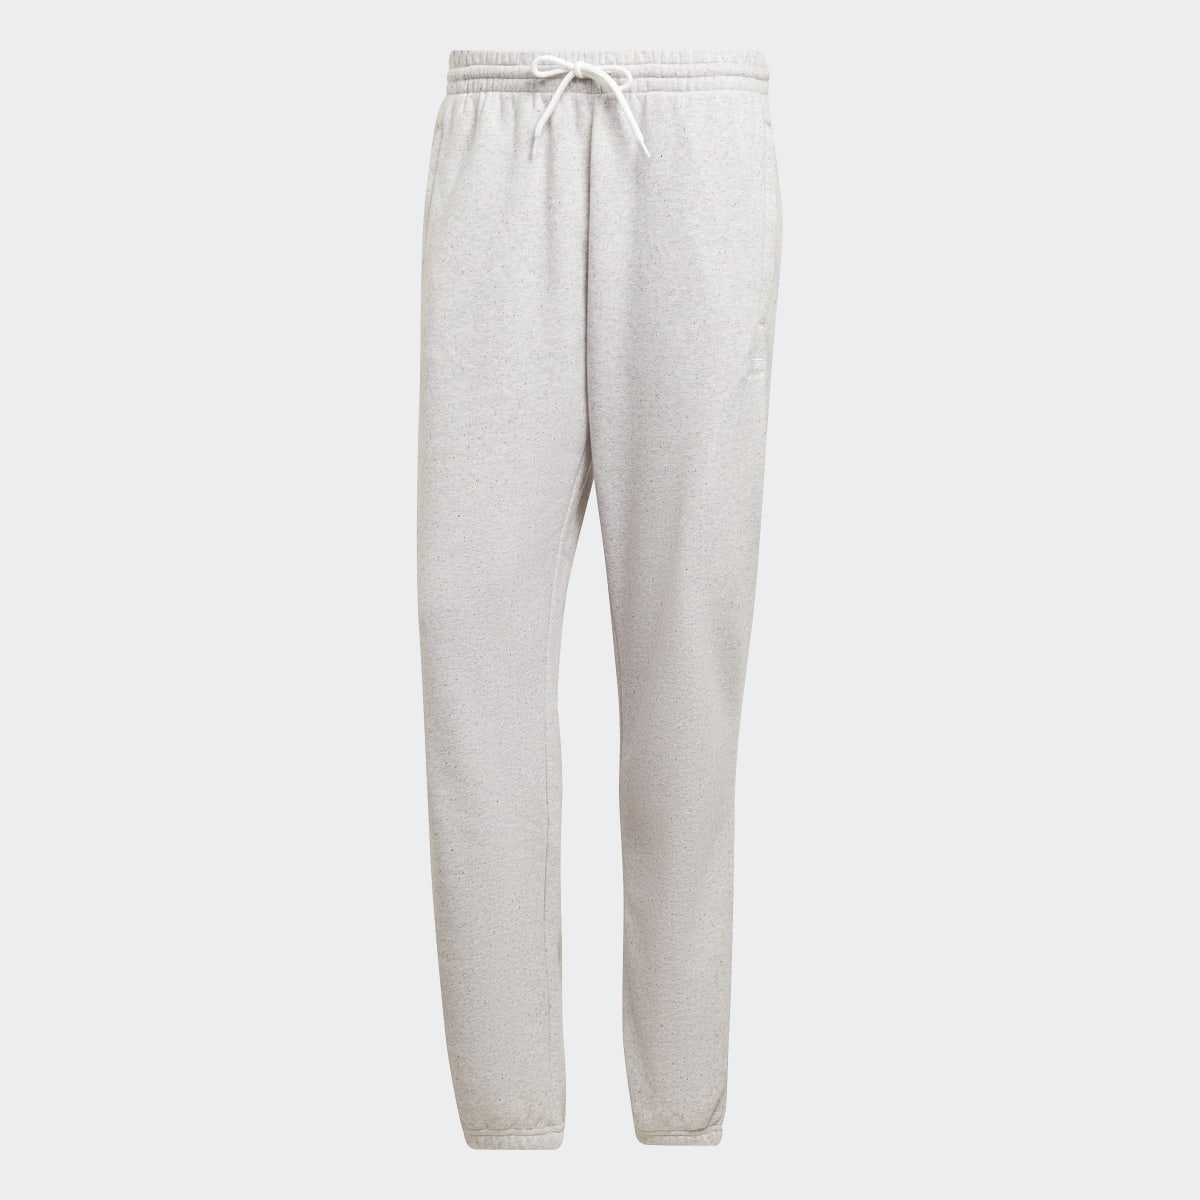 Adidas Sweat pants Essentials+ Made with Nature. 5